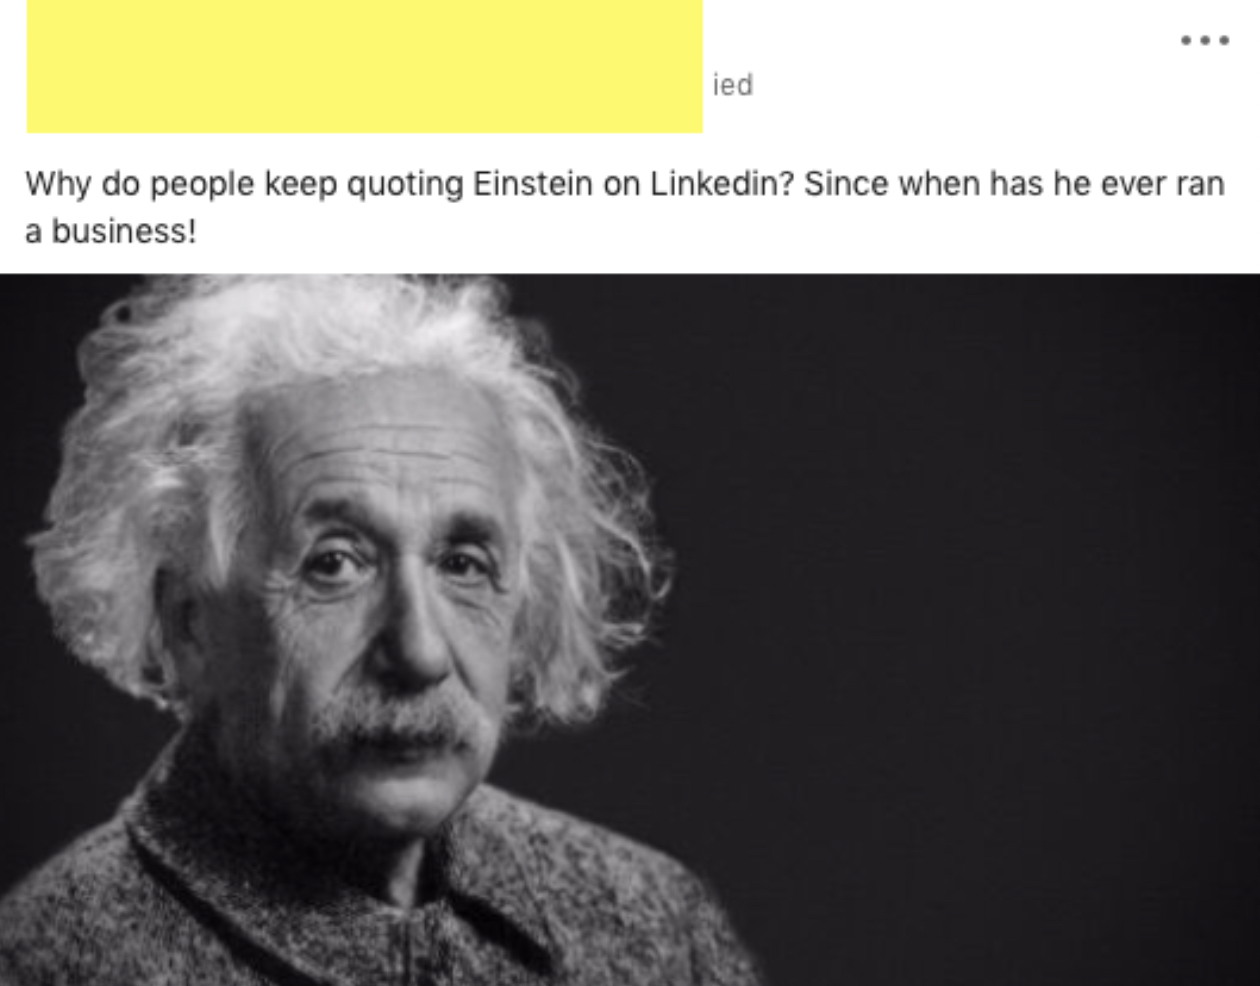 albert einstein - ied Why do people keep quoting Einstein on Linkedin? Since when has he ever ran a business!